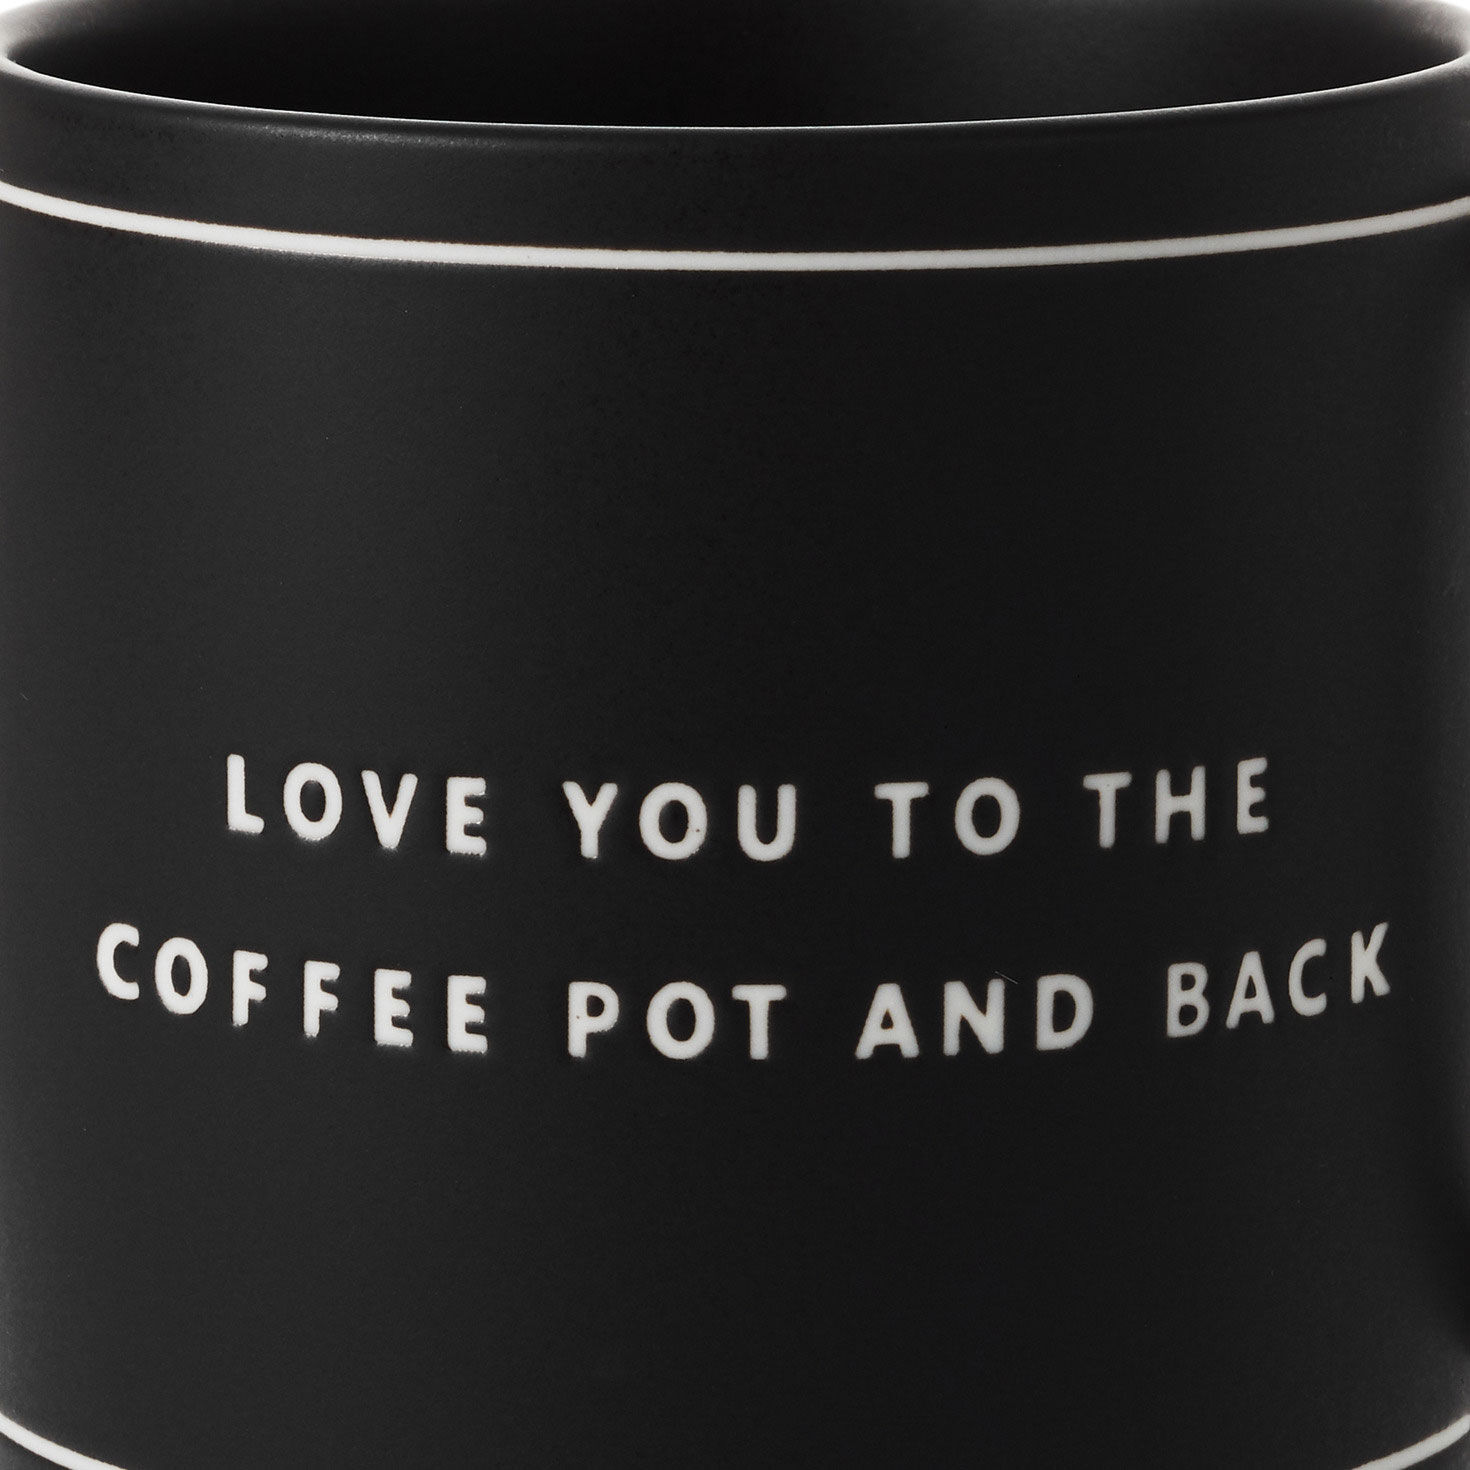 To the Coffee Pot and Back Funny Mug, 16 oz. for only USD 16.99 | Hallmark